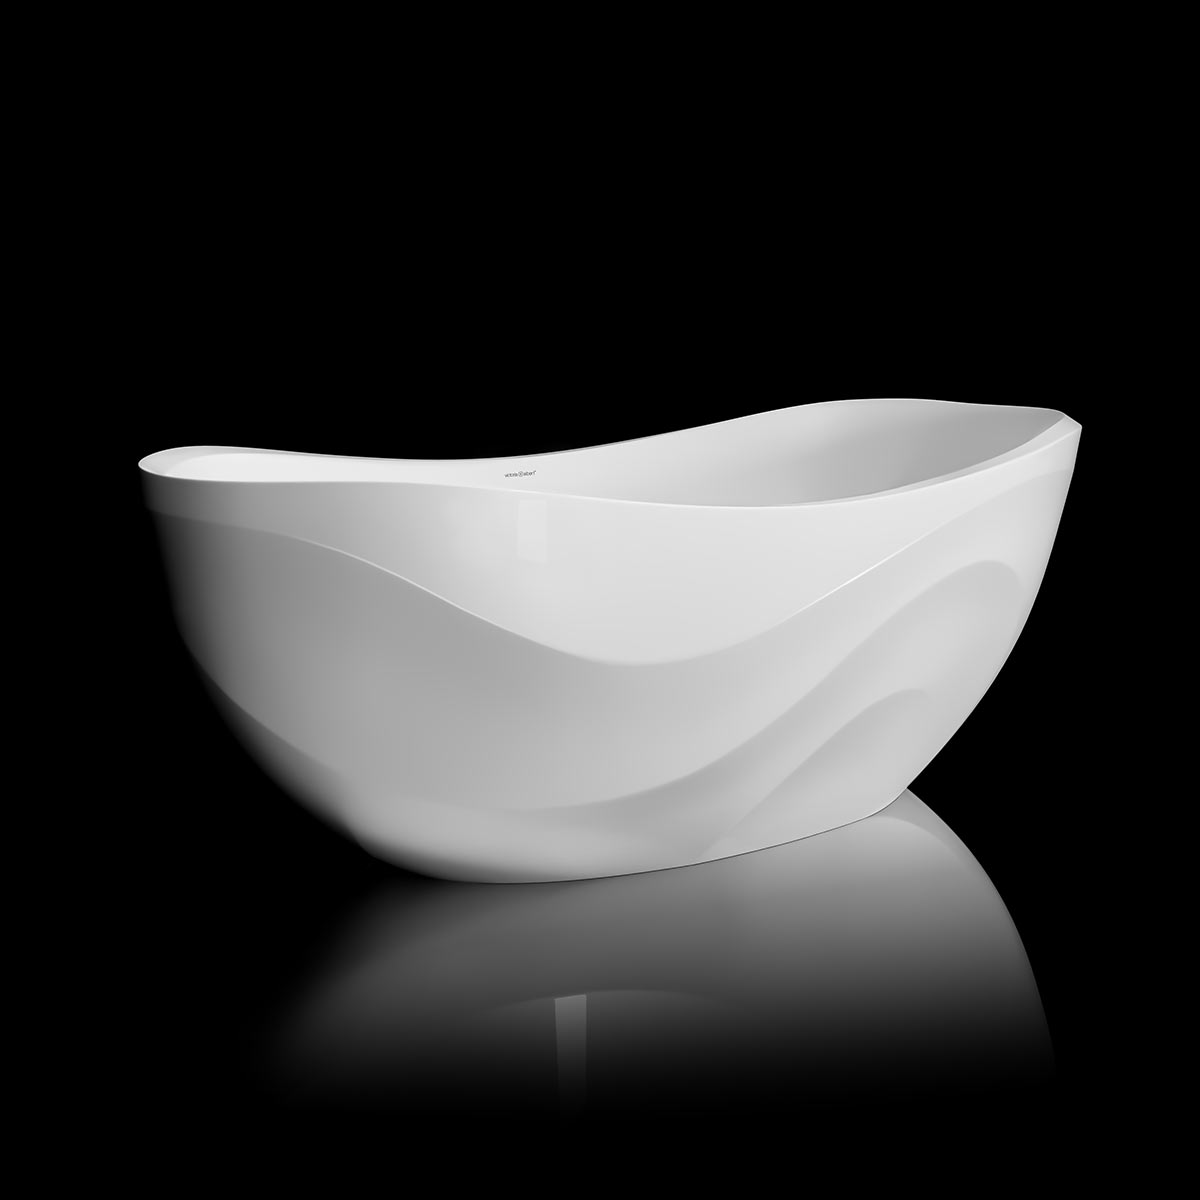 Victoria + Albert Seros 1800 bath, sculpted wave design stone bath inspired by Sophie Elizabeth Thompson sculptures. Available in Gloss White and Matt White in bath, vessel basin and pedestal basin formats. Distributed in Australia by Luxe by Design, Brisbane.